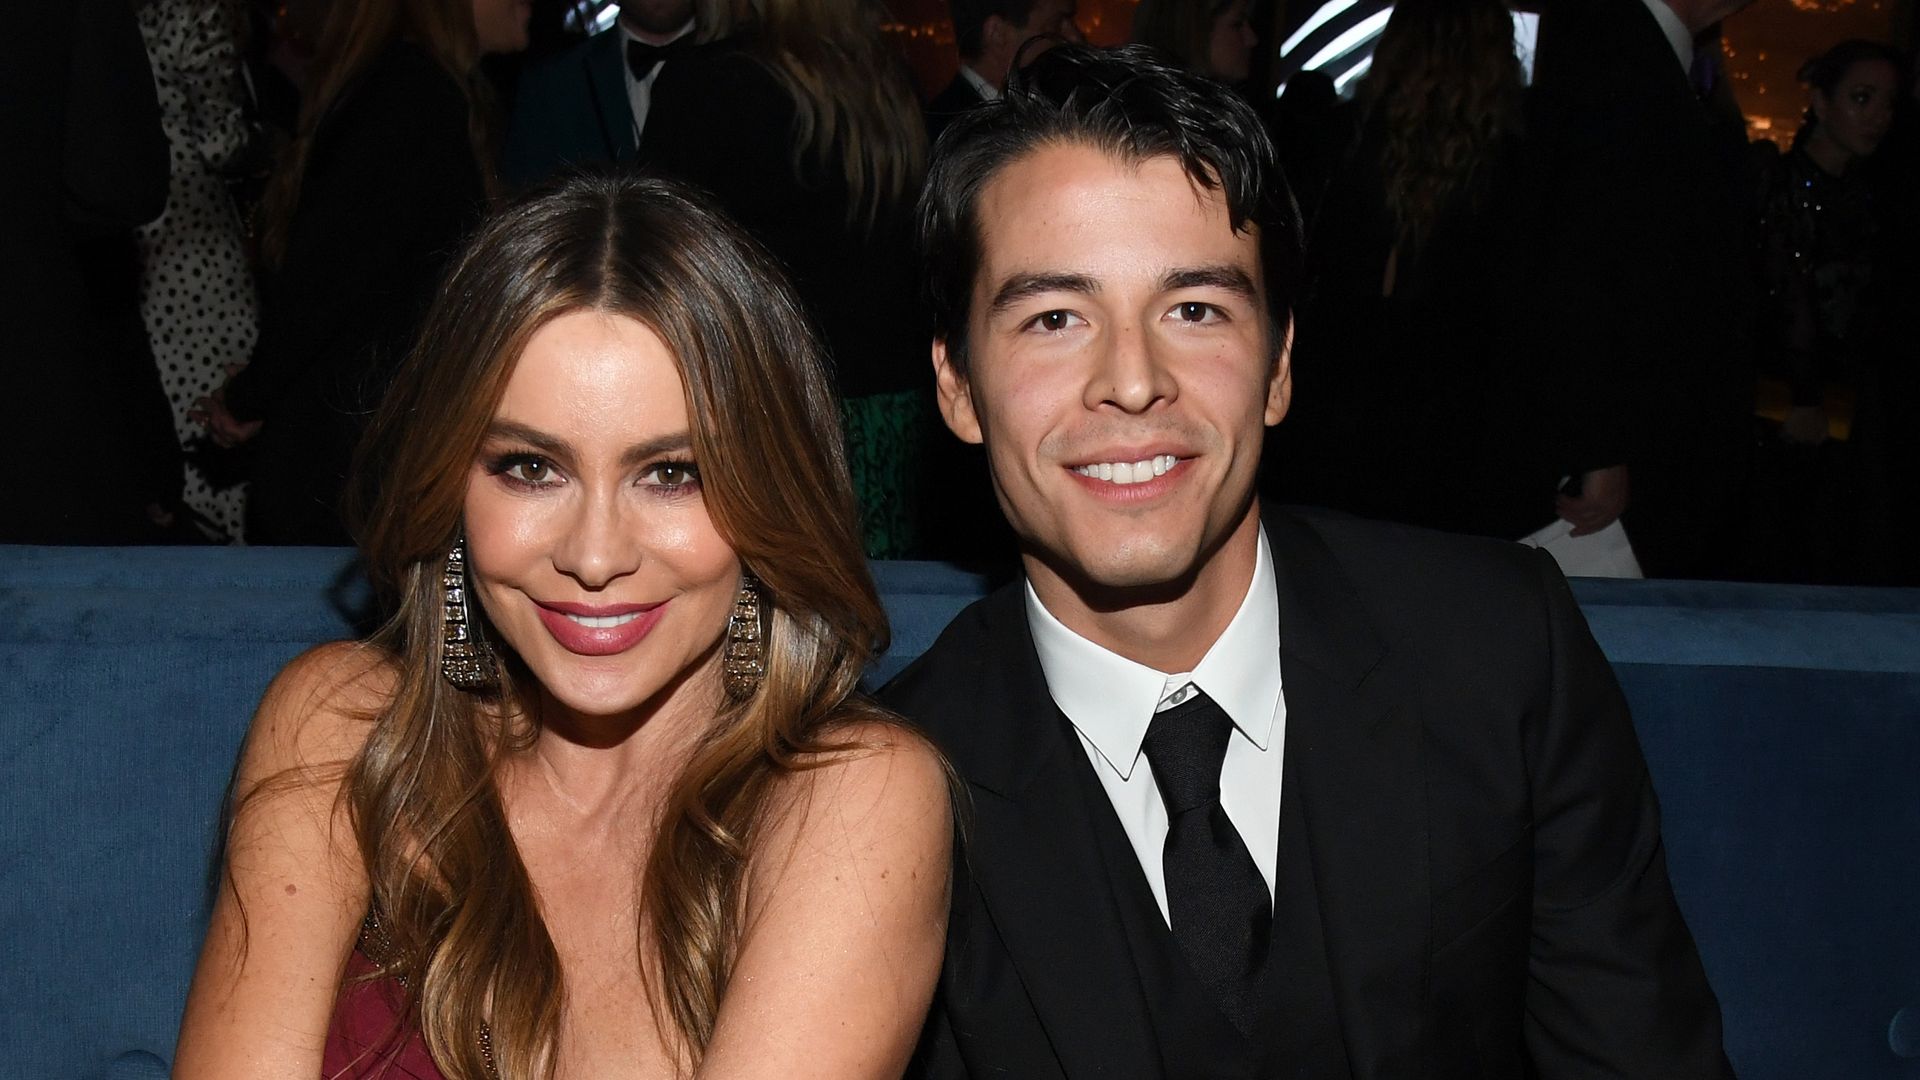 Sofia Vergara reveals hopes of becoming a grandmother as she gets candid on not wanting more kids